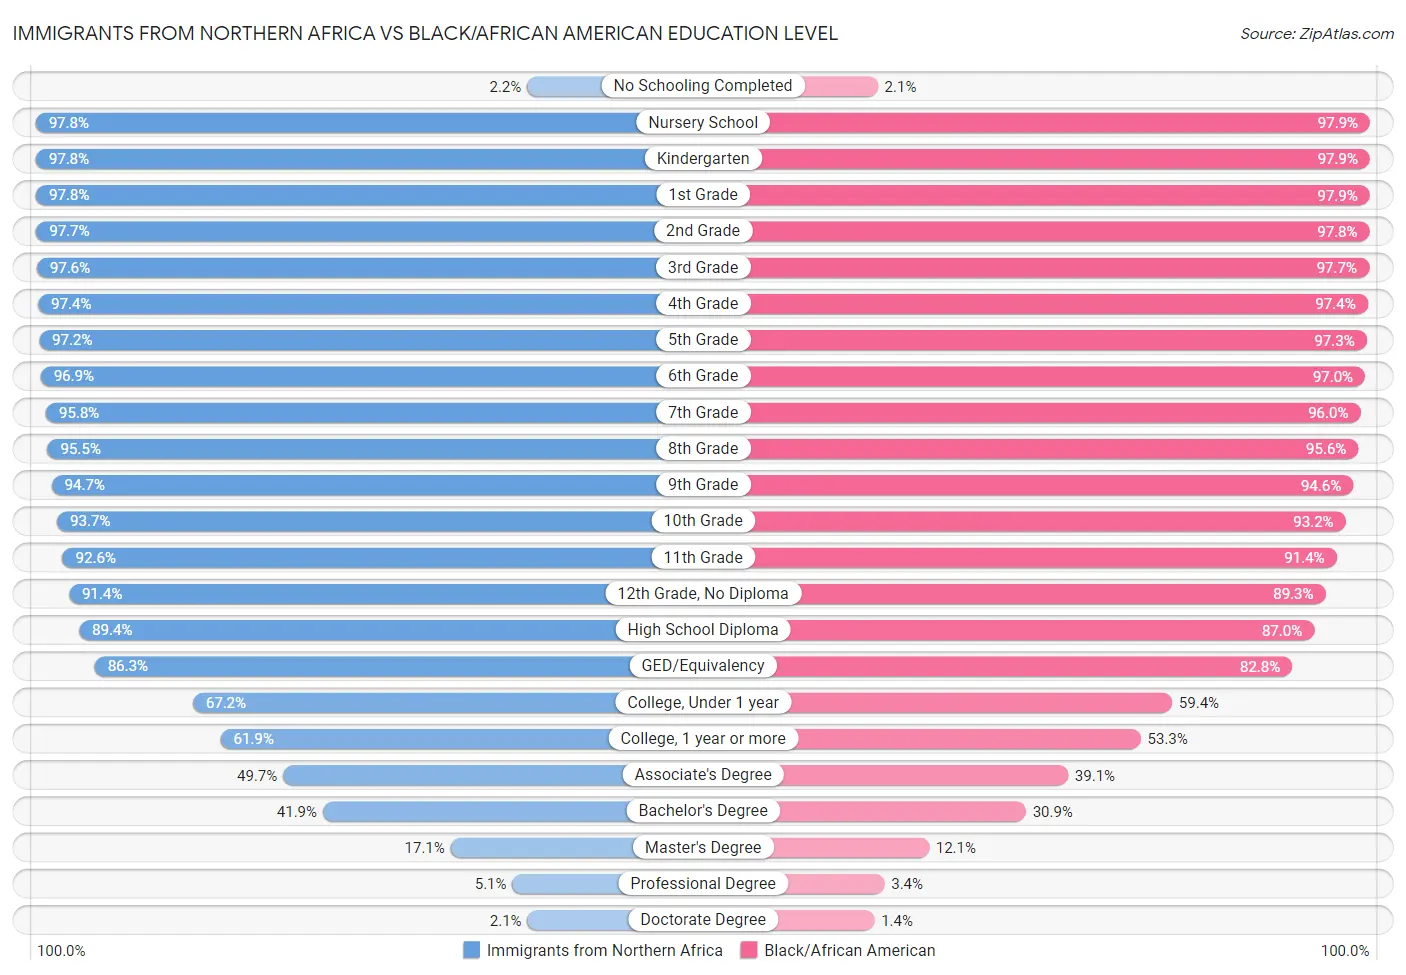 Immigrants from Northern Africa vs Black/African American Education Level